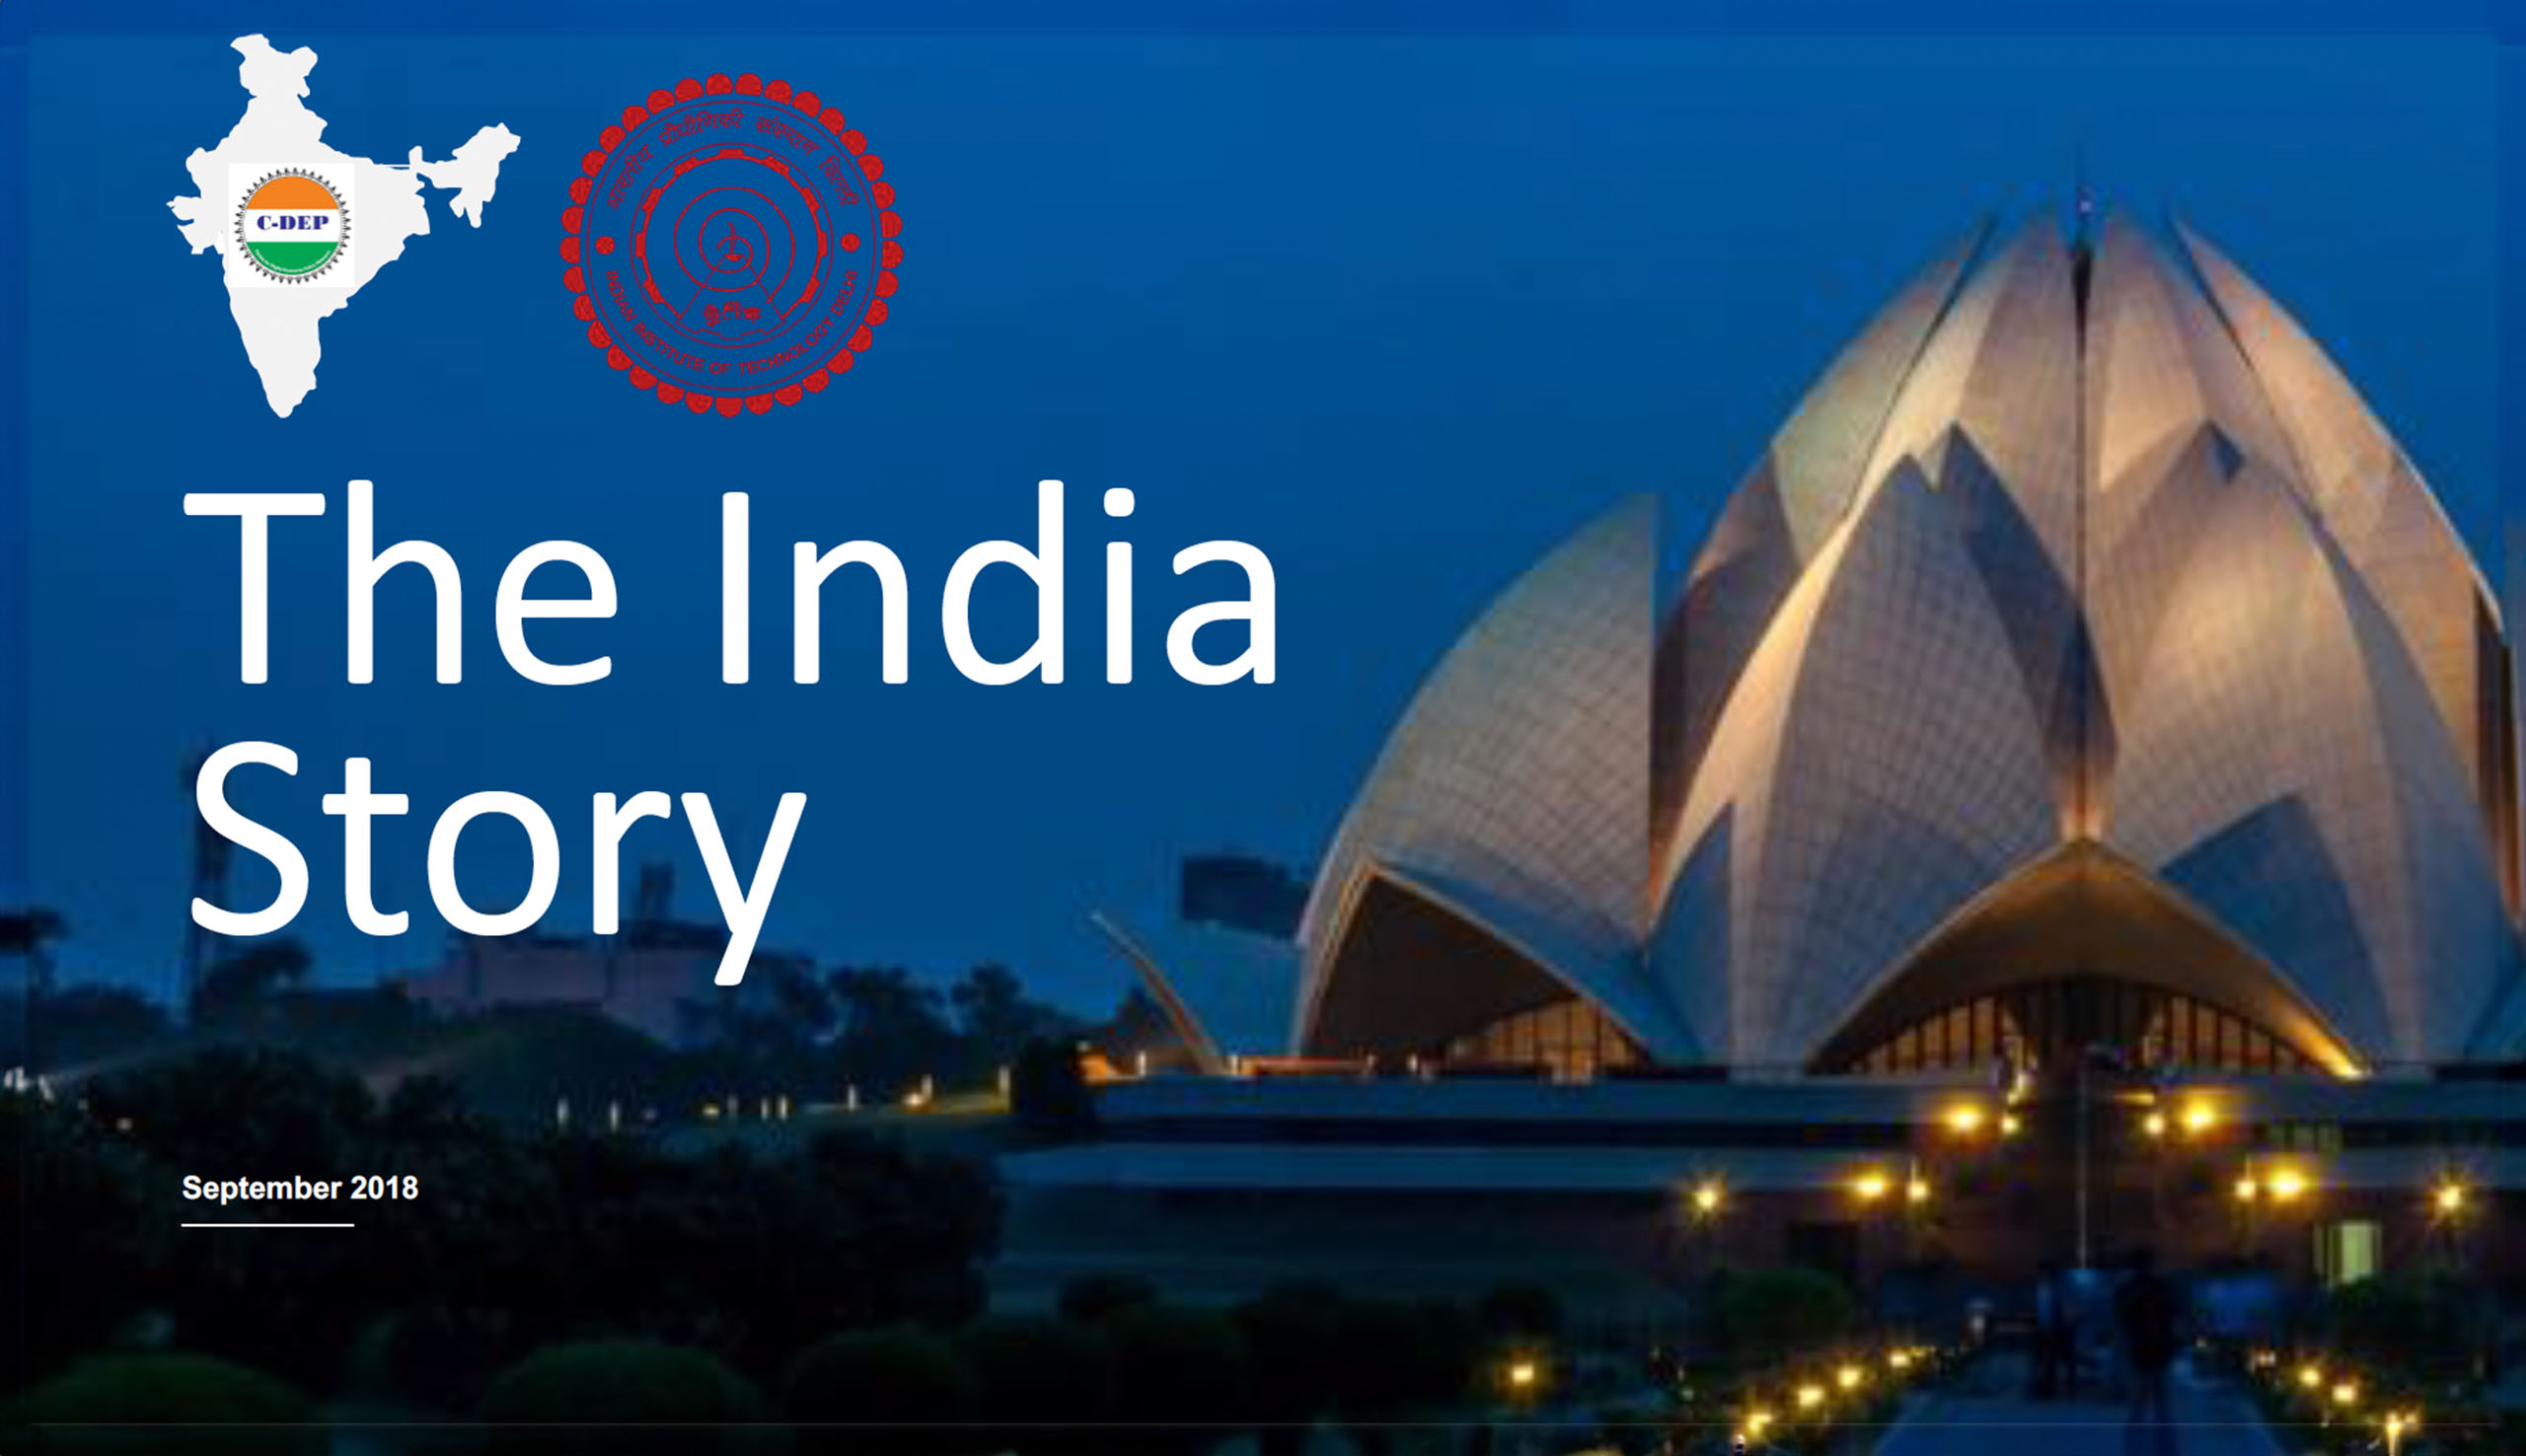 The India Story Report by C-DEP